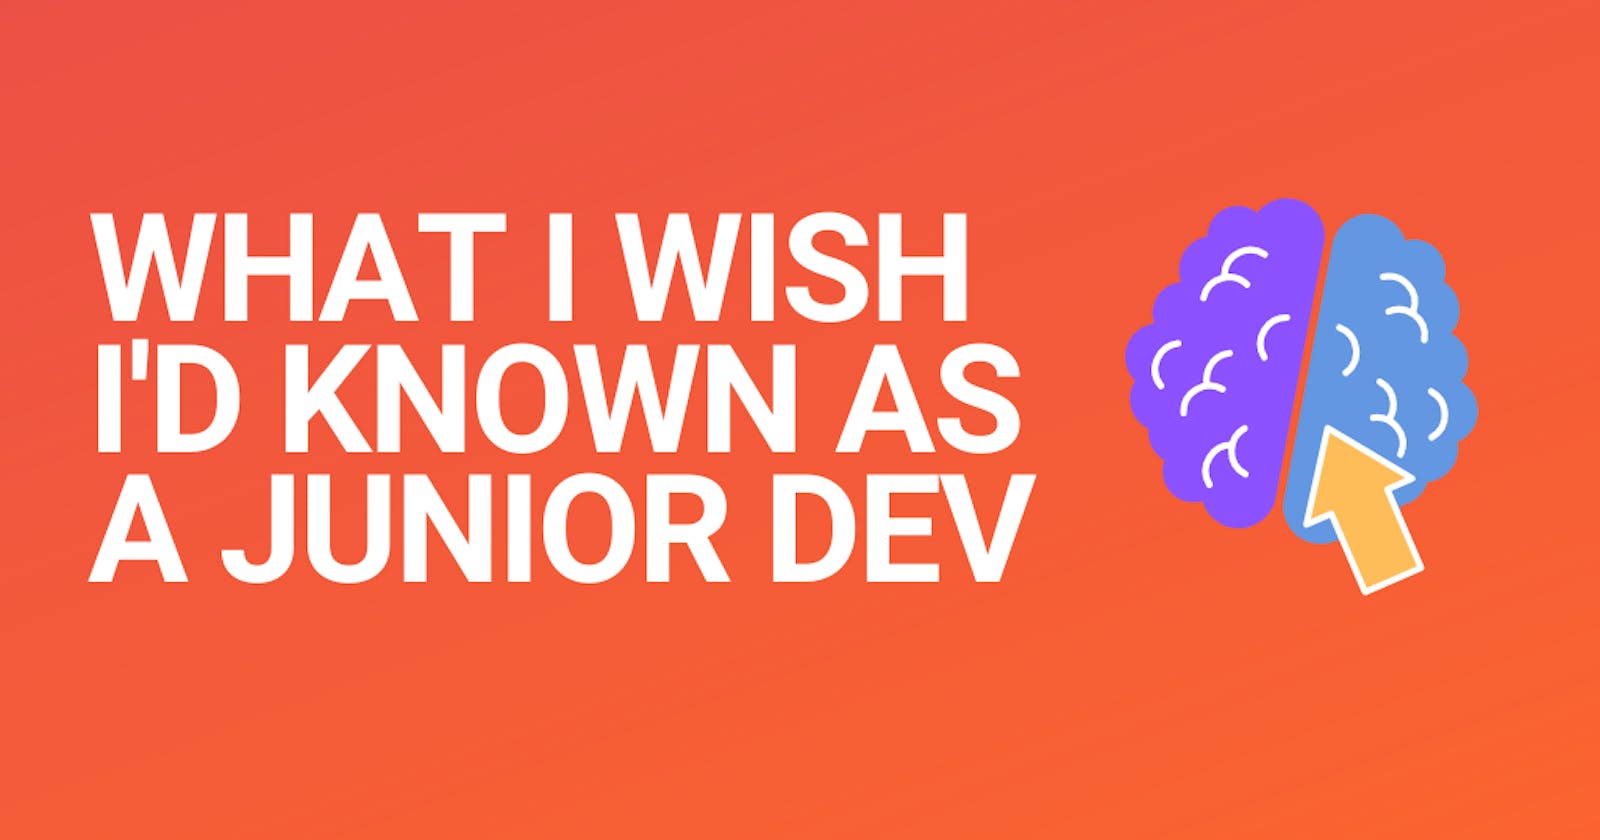 Things I wish I'd known as a junior developer